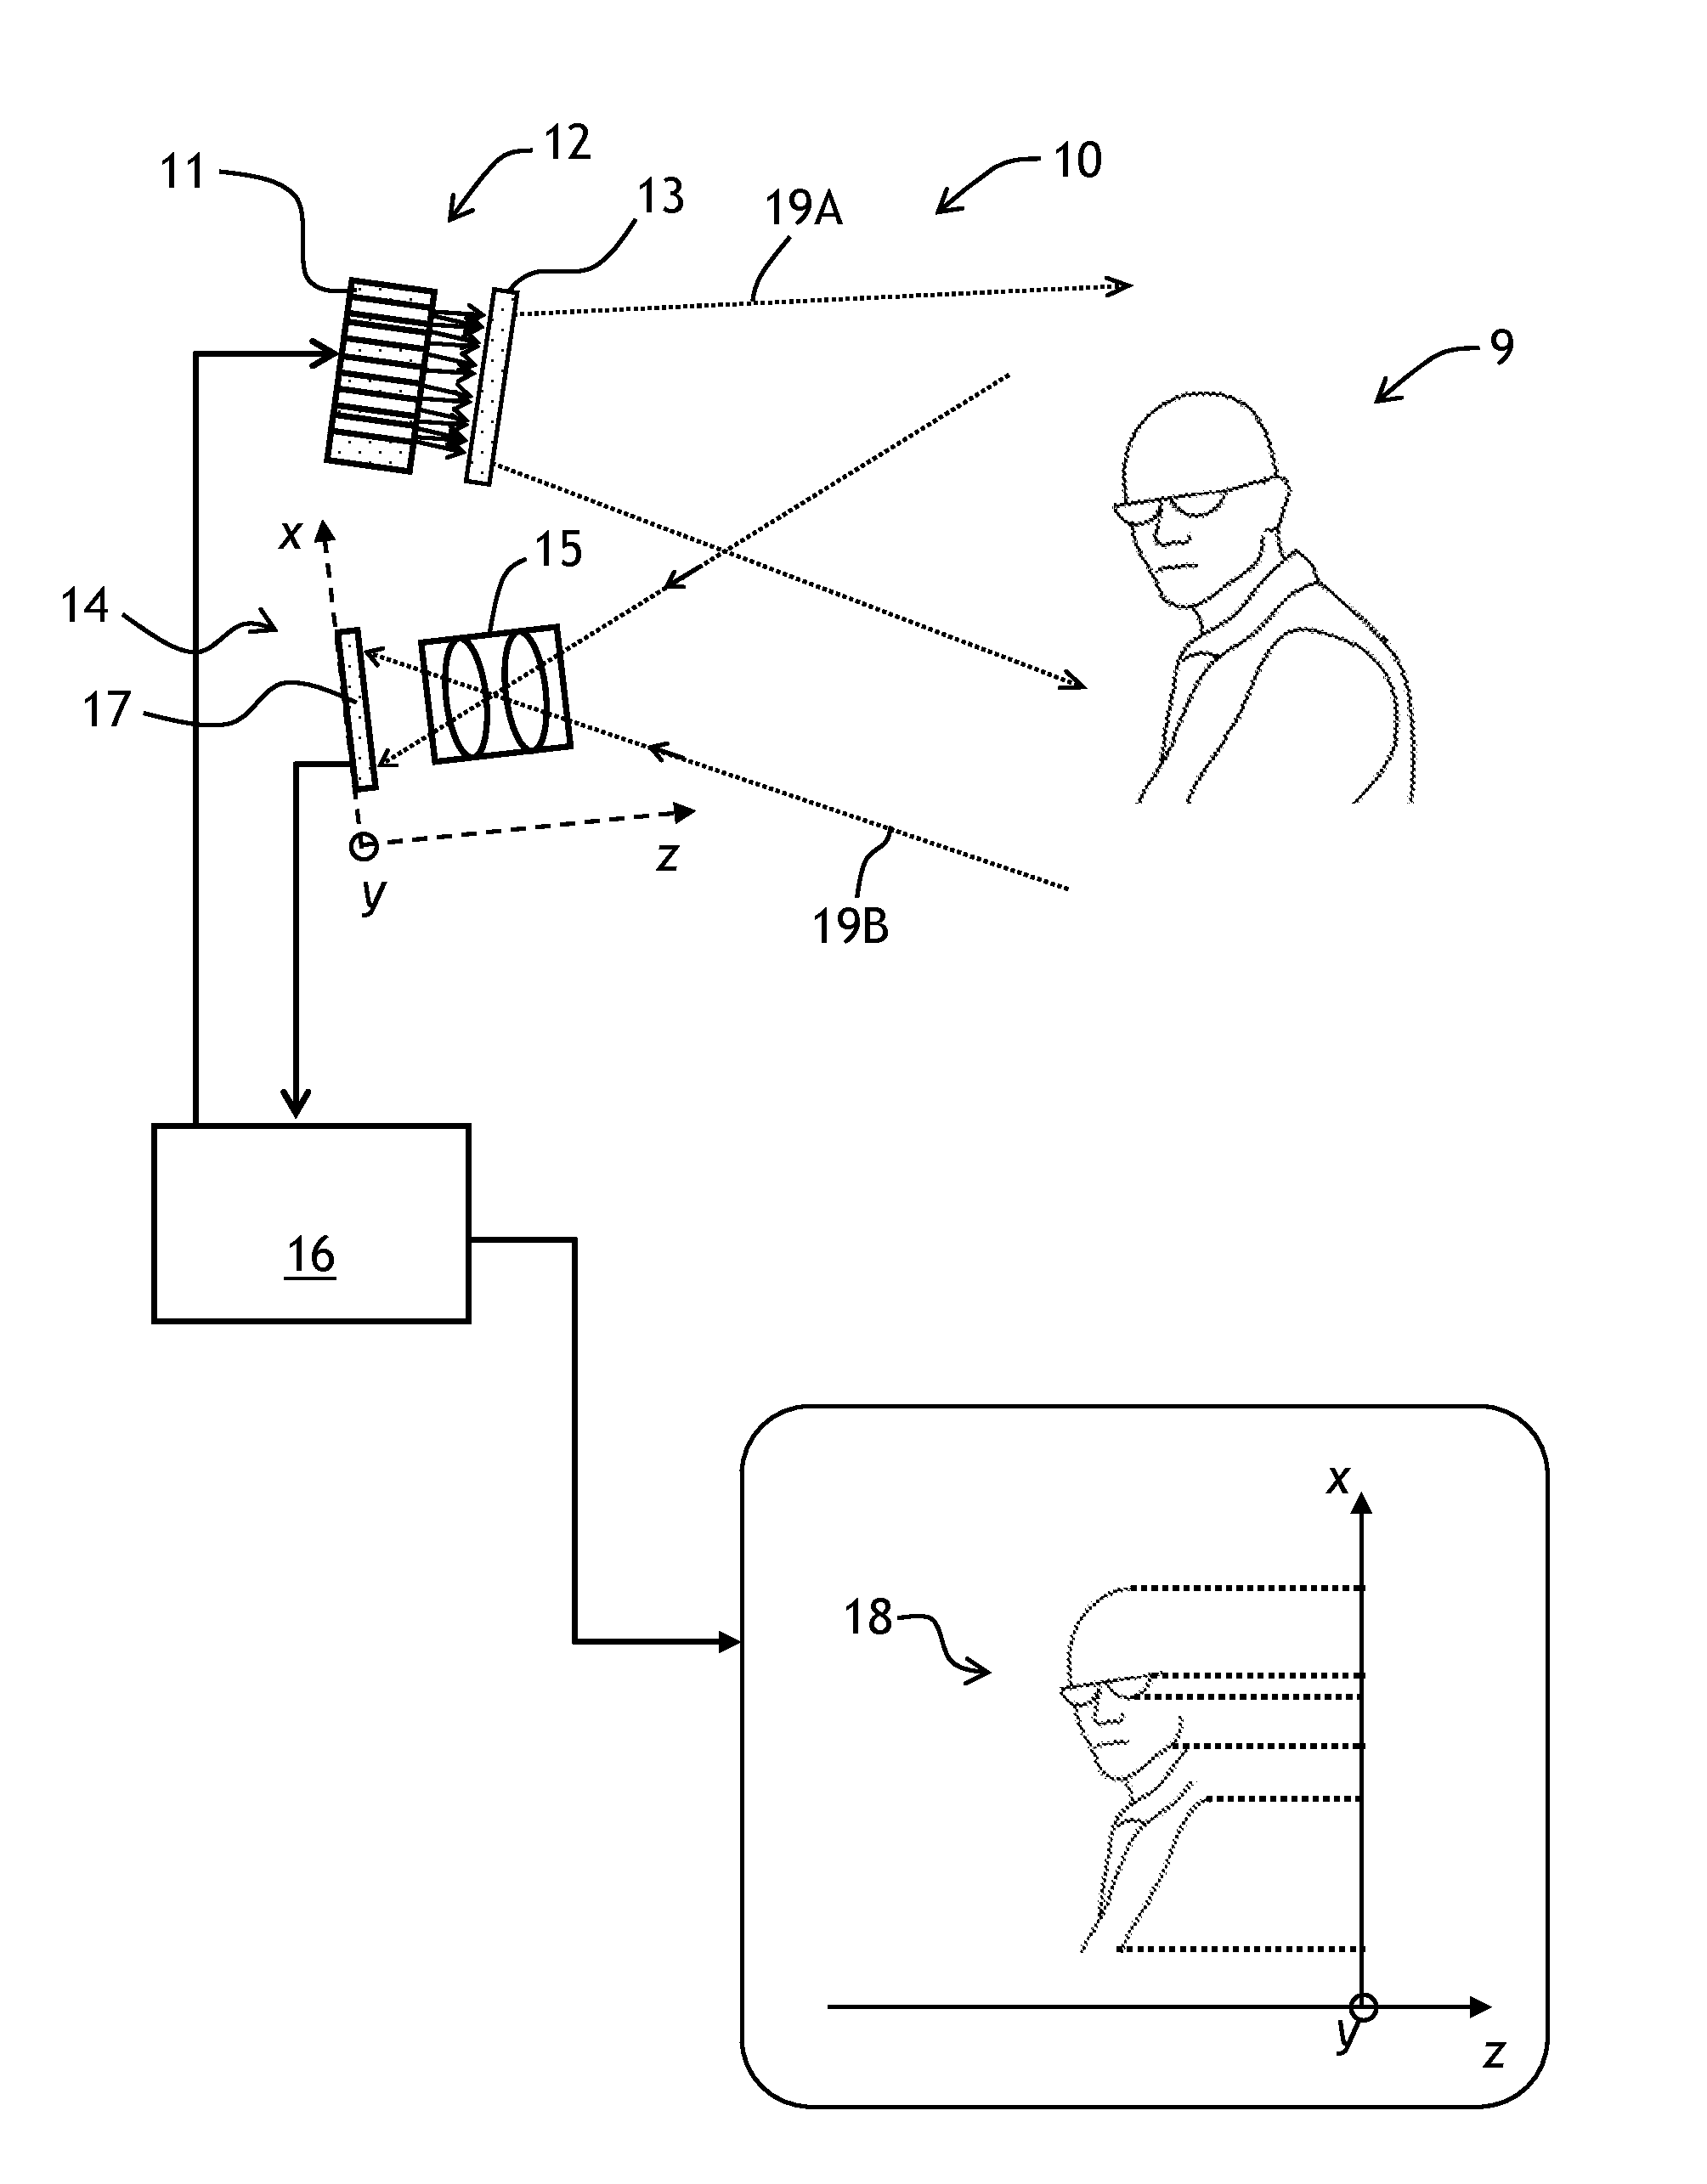 Range imaging devices and methods